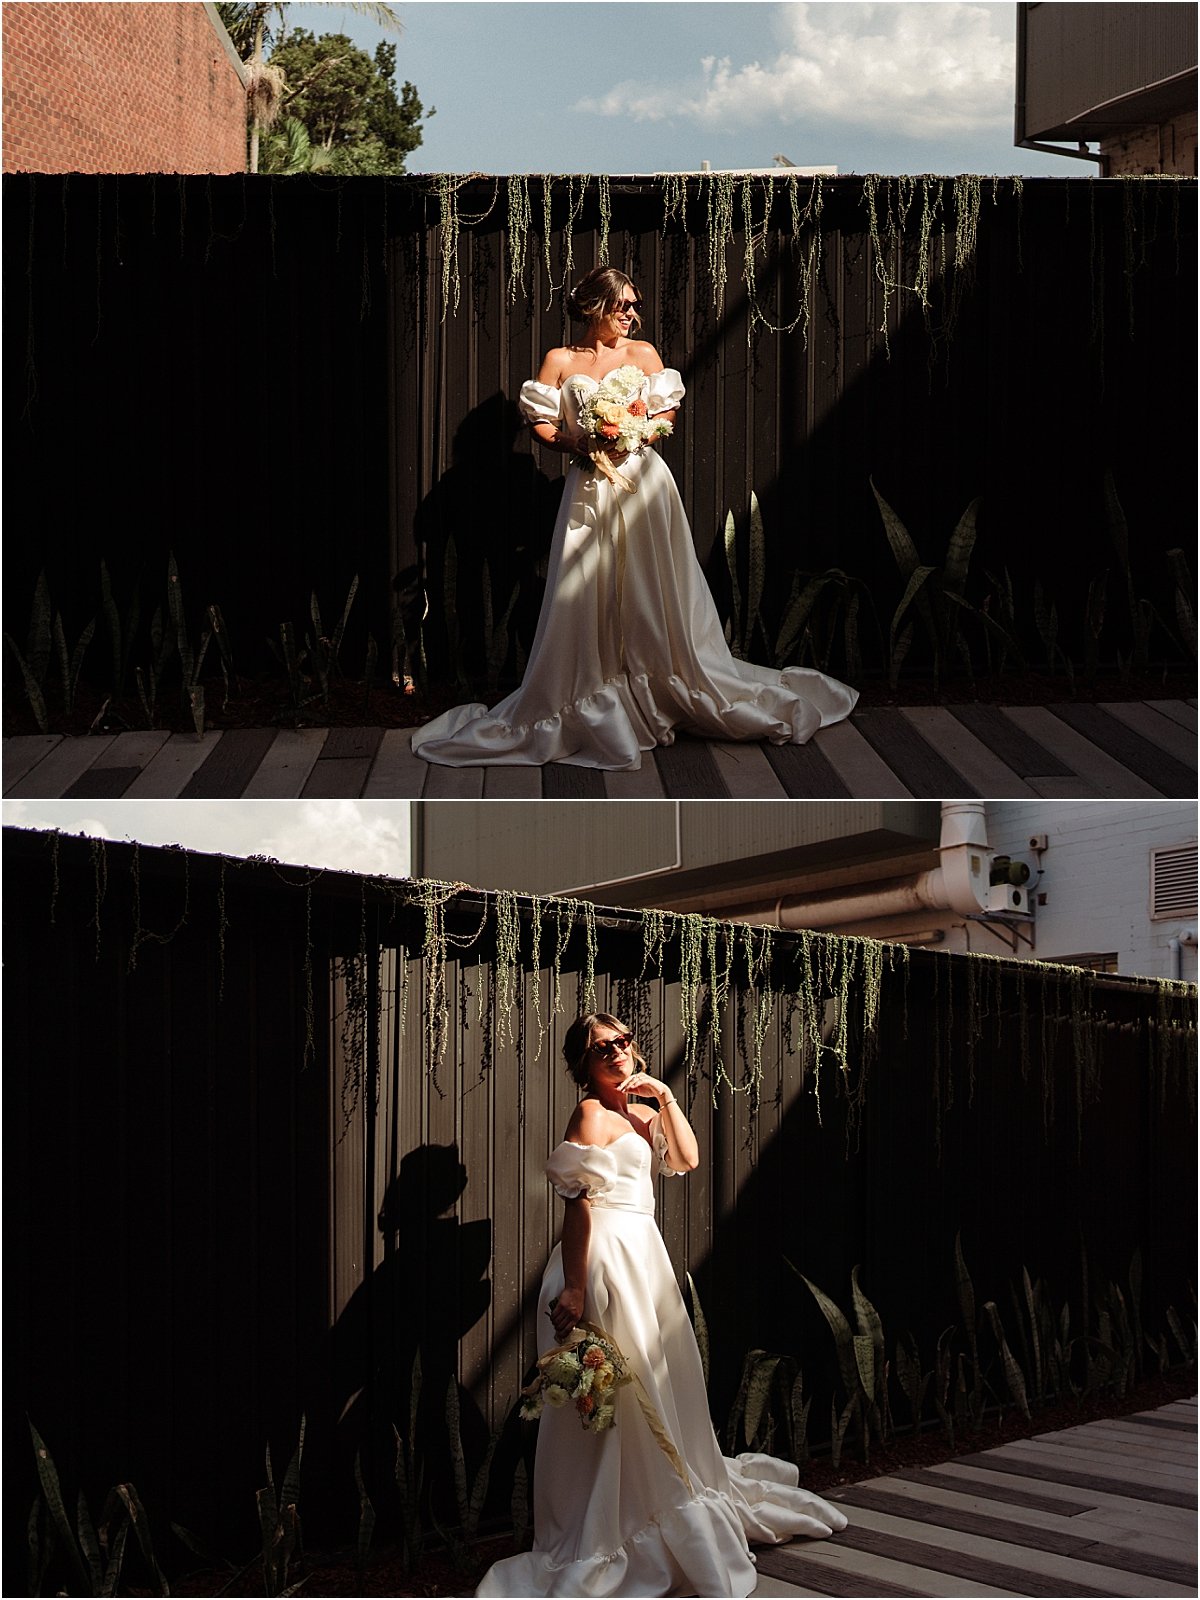 Bride standing in front of black wall wearing cat eye sunglasses and wearing white wedding gown with puff sleeves